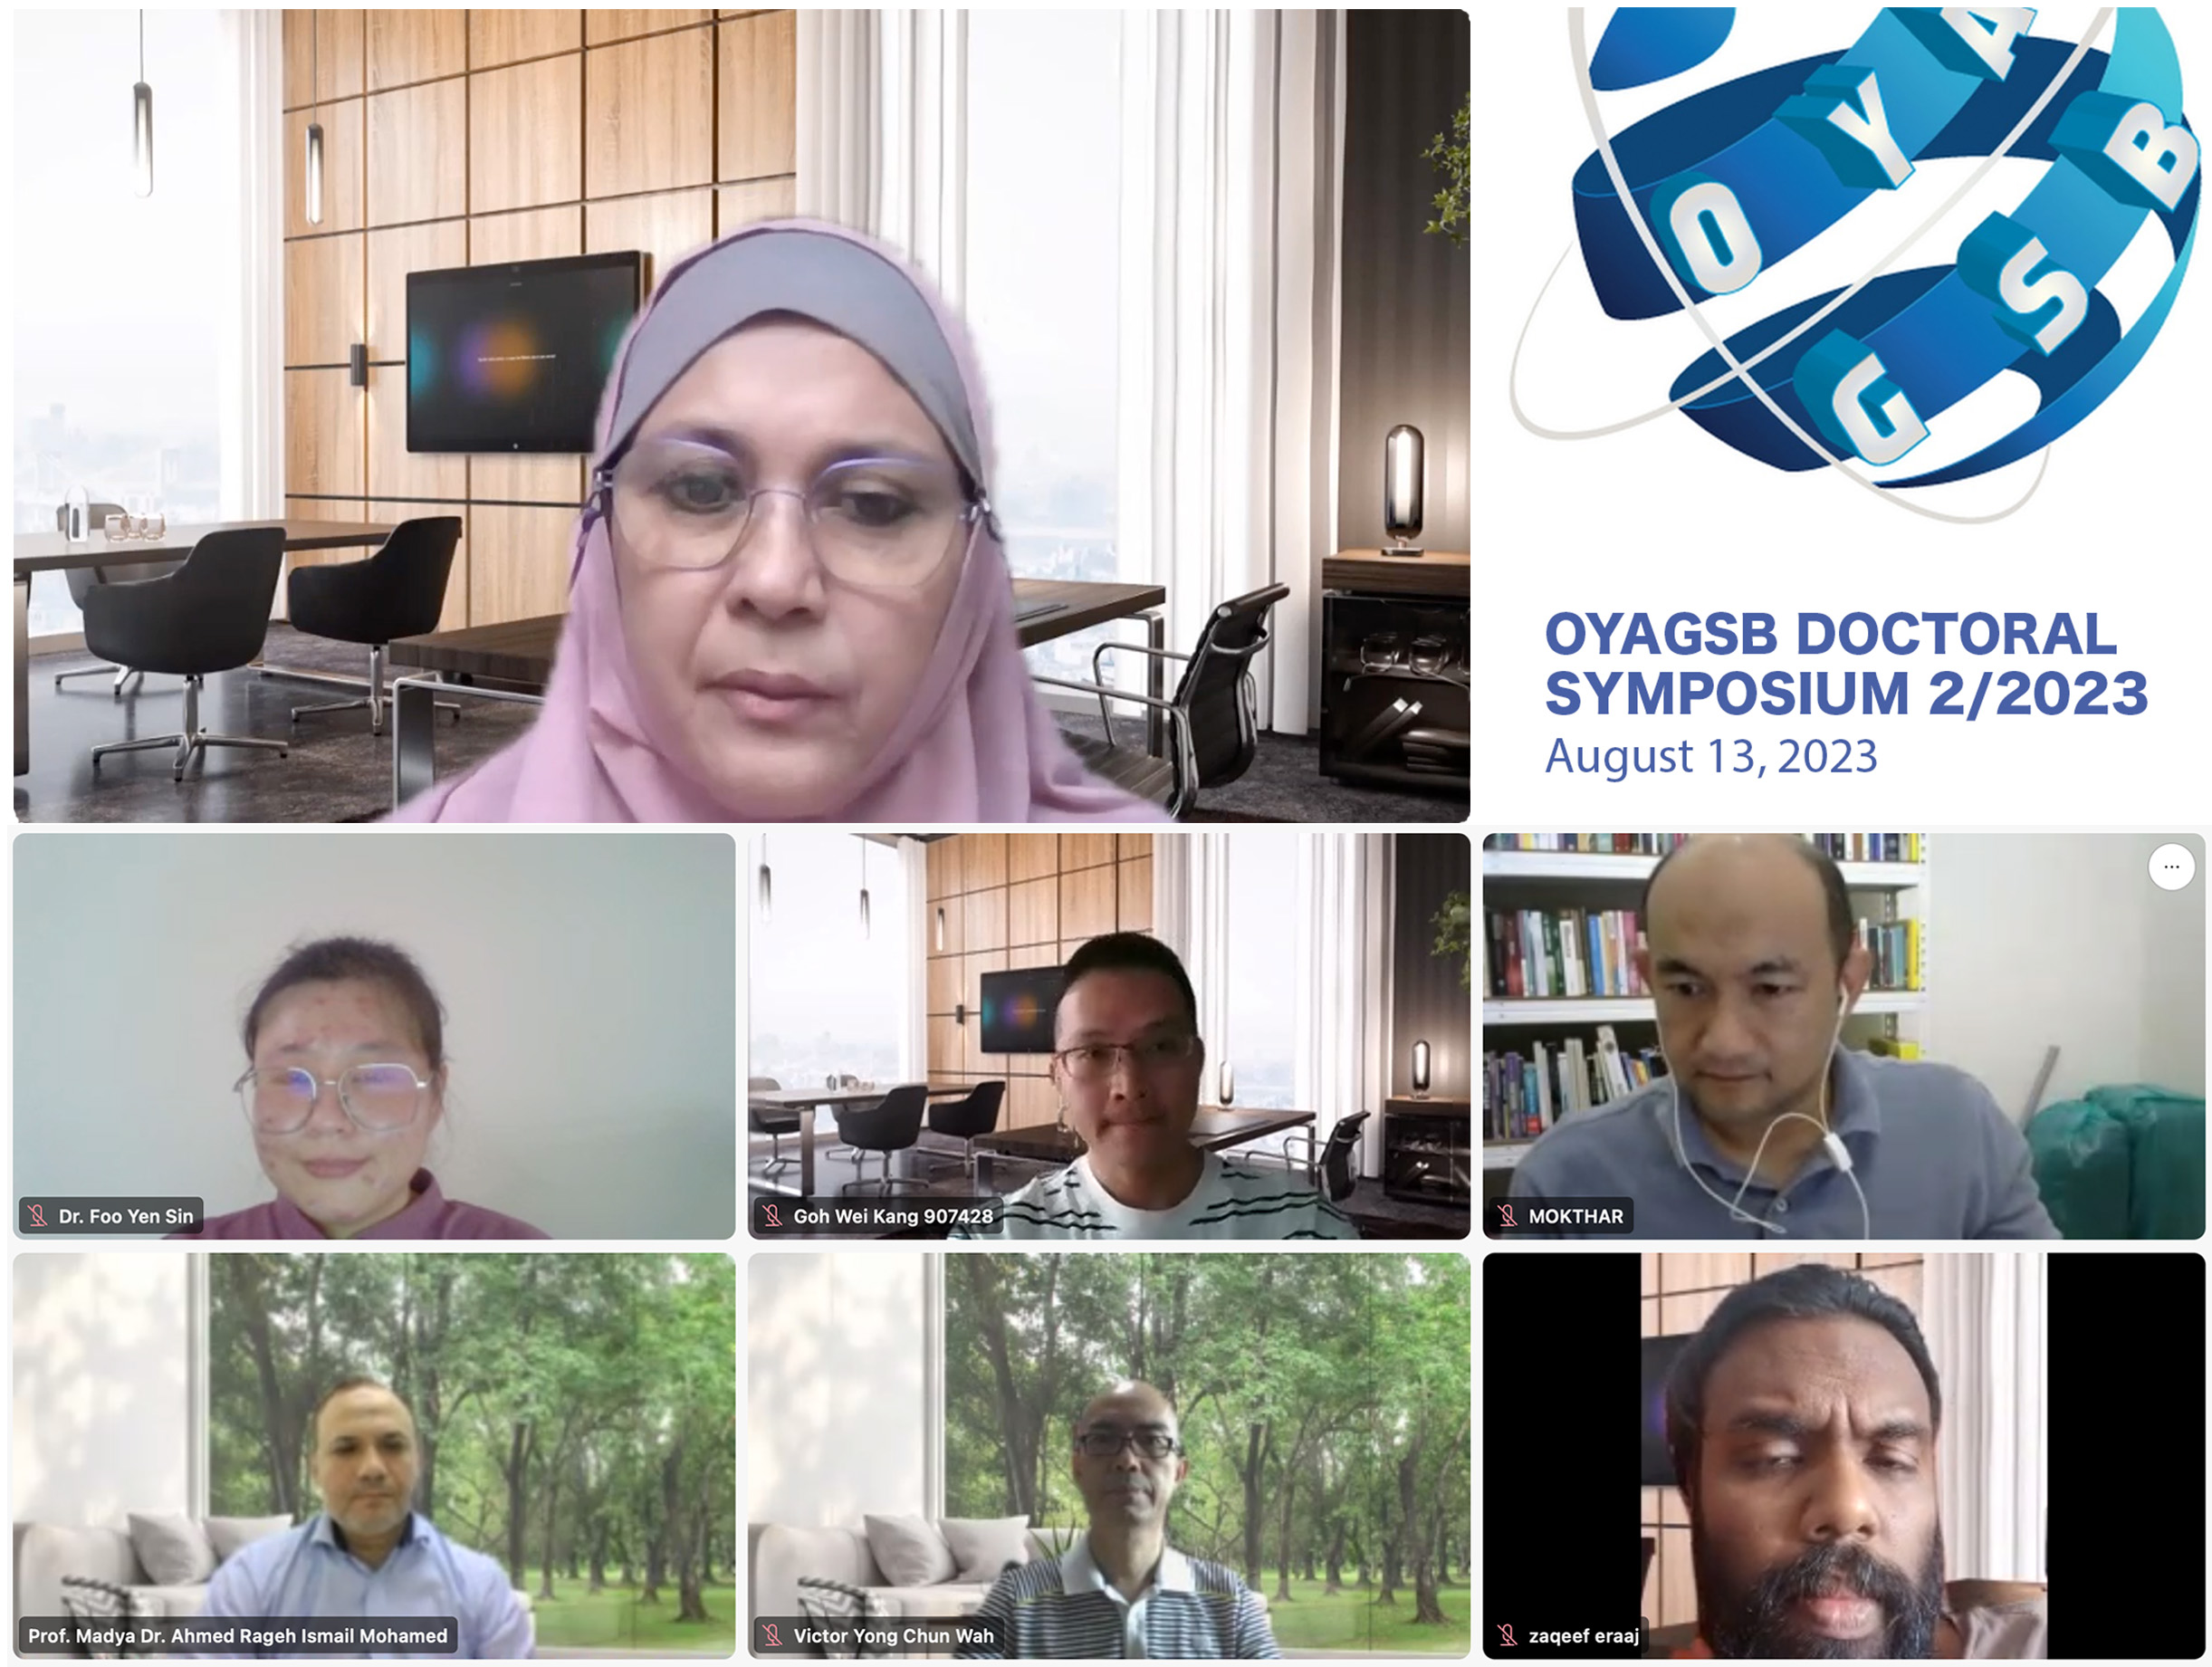 OYAGSB Doctoral Symposium - one-day event aimed at developing and mentoring Doctoral students